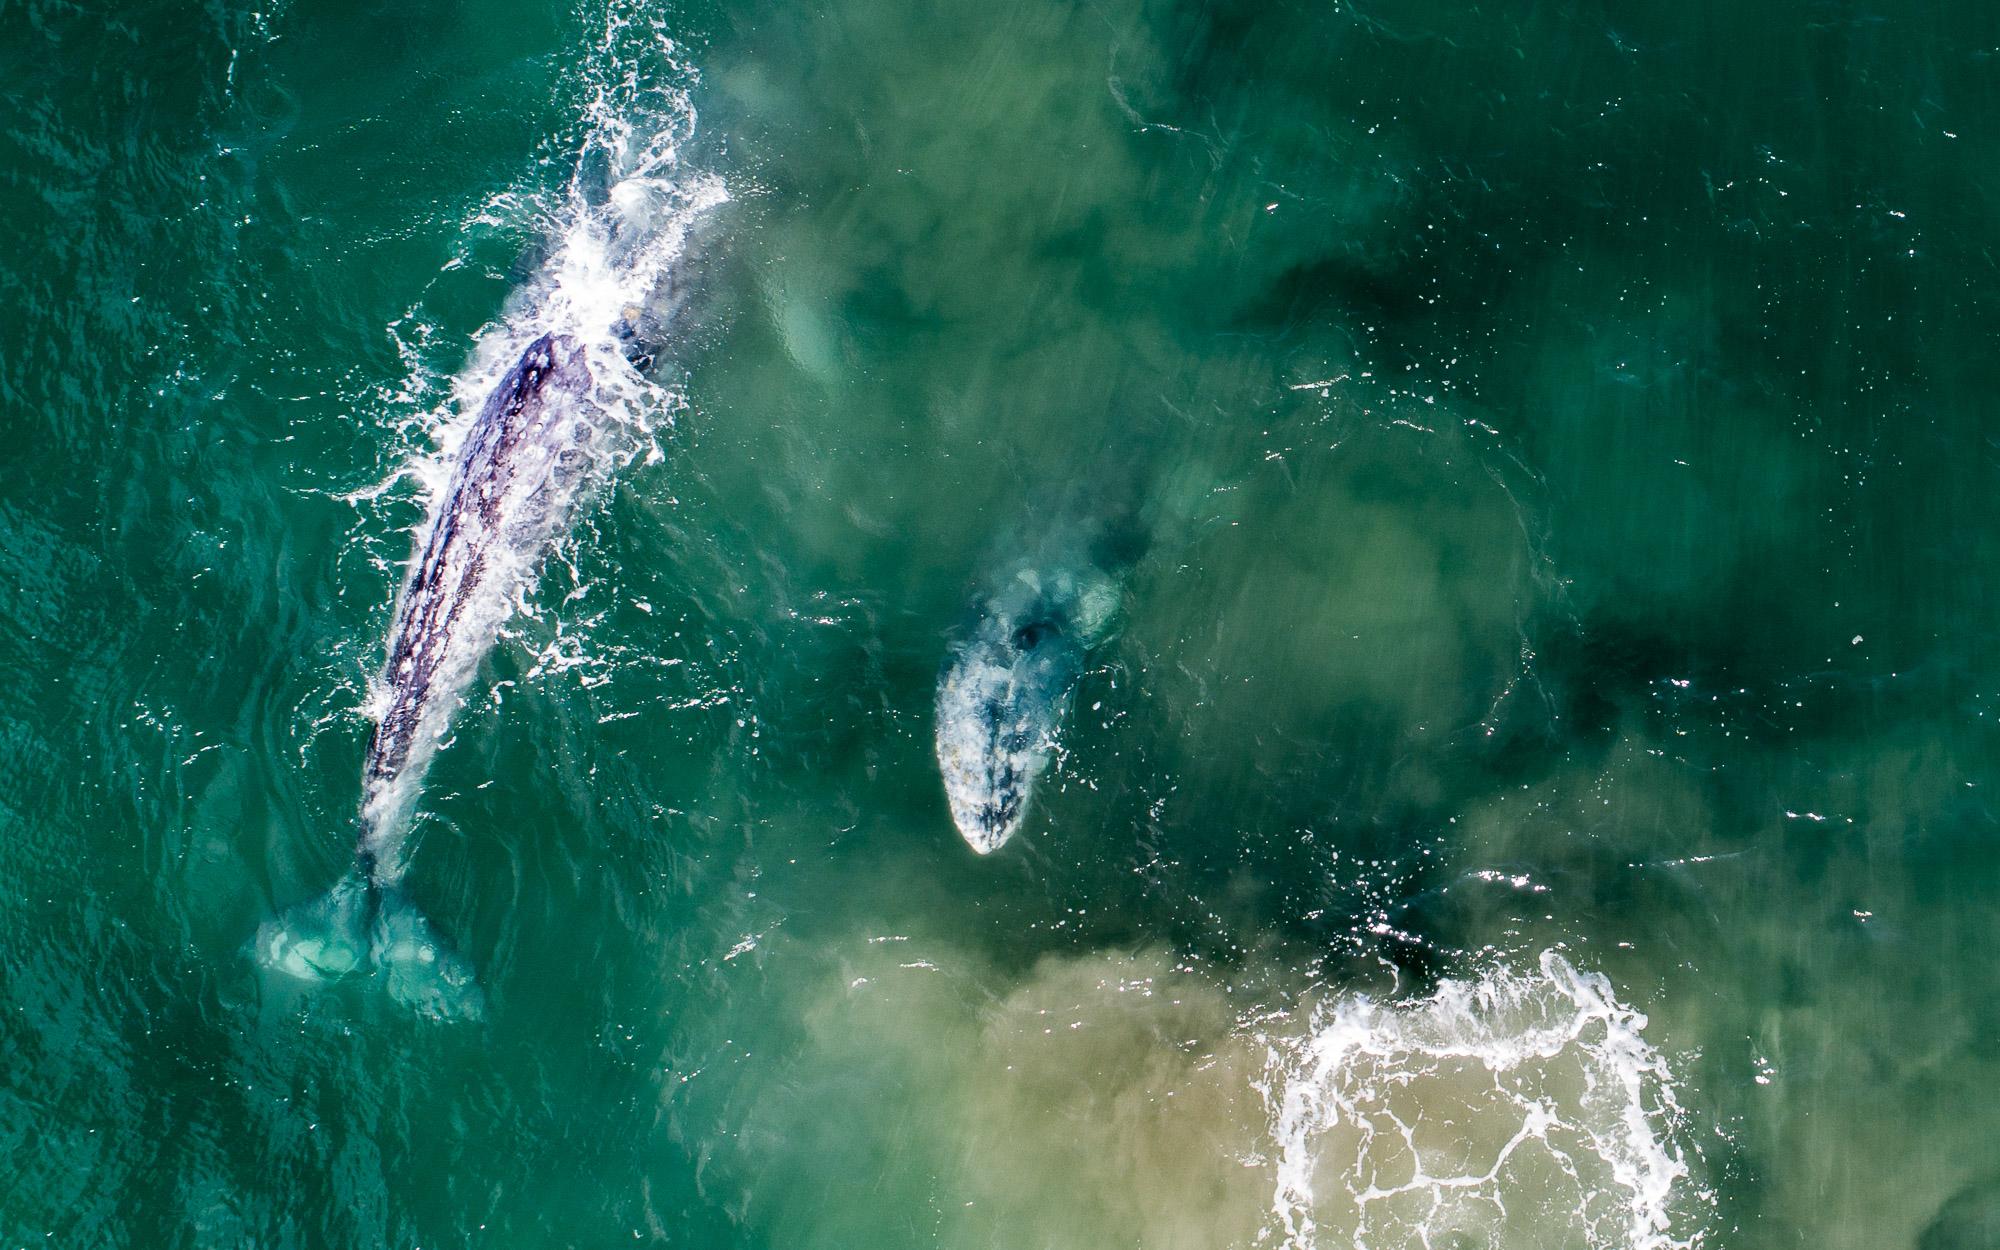 17. Gray Whale migration, March 2018